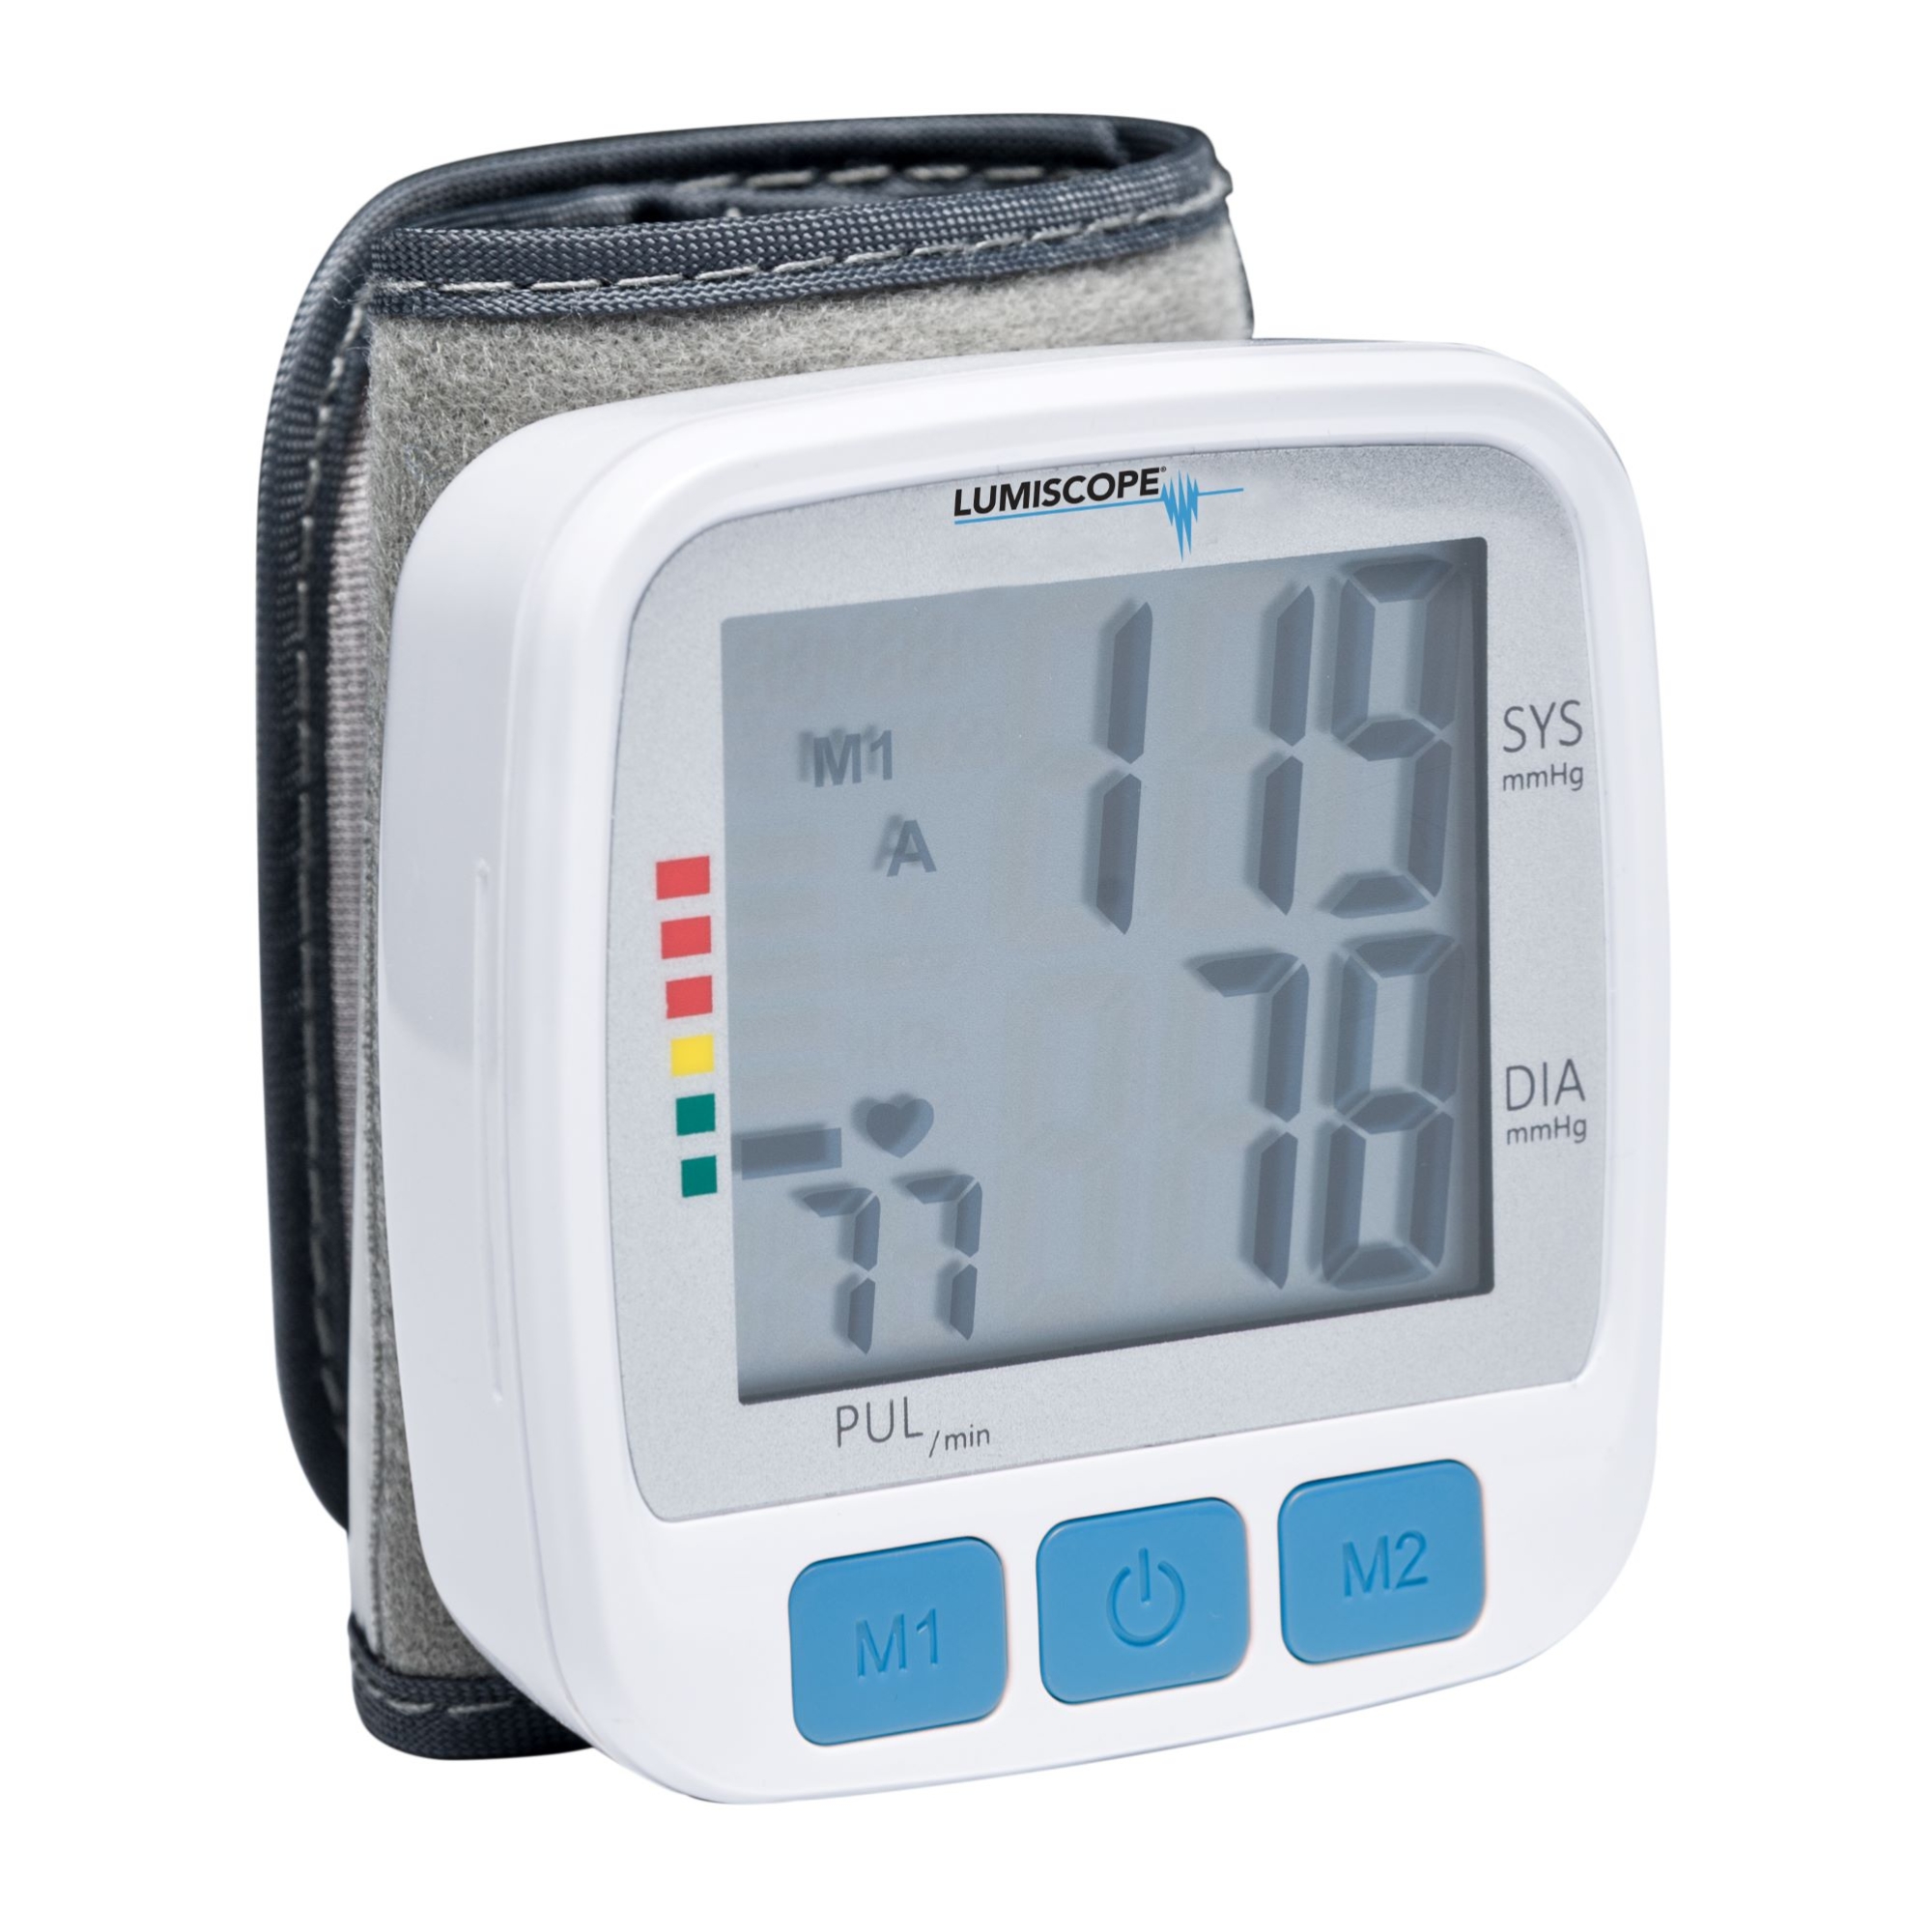 Electronic Wrist Blood Pressure Monitor – NuvoMed